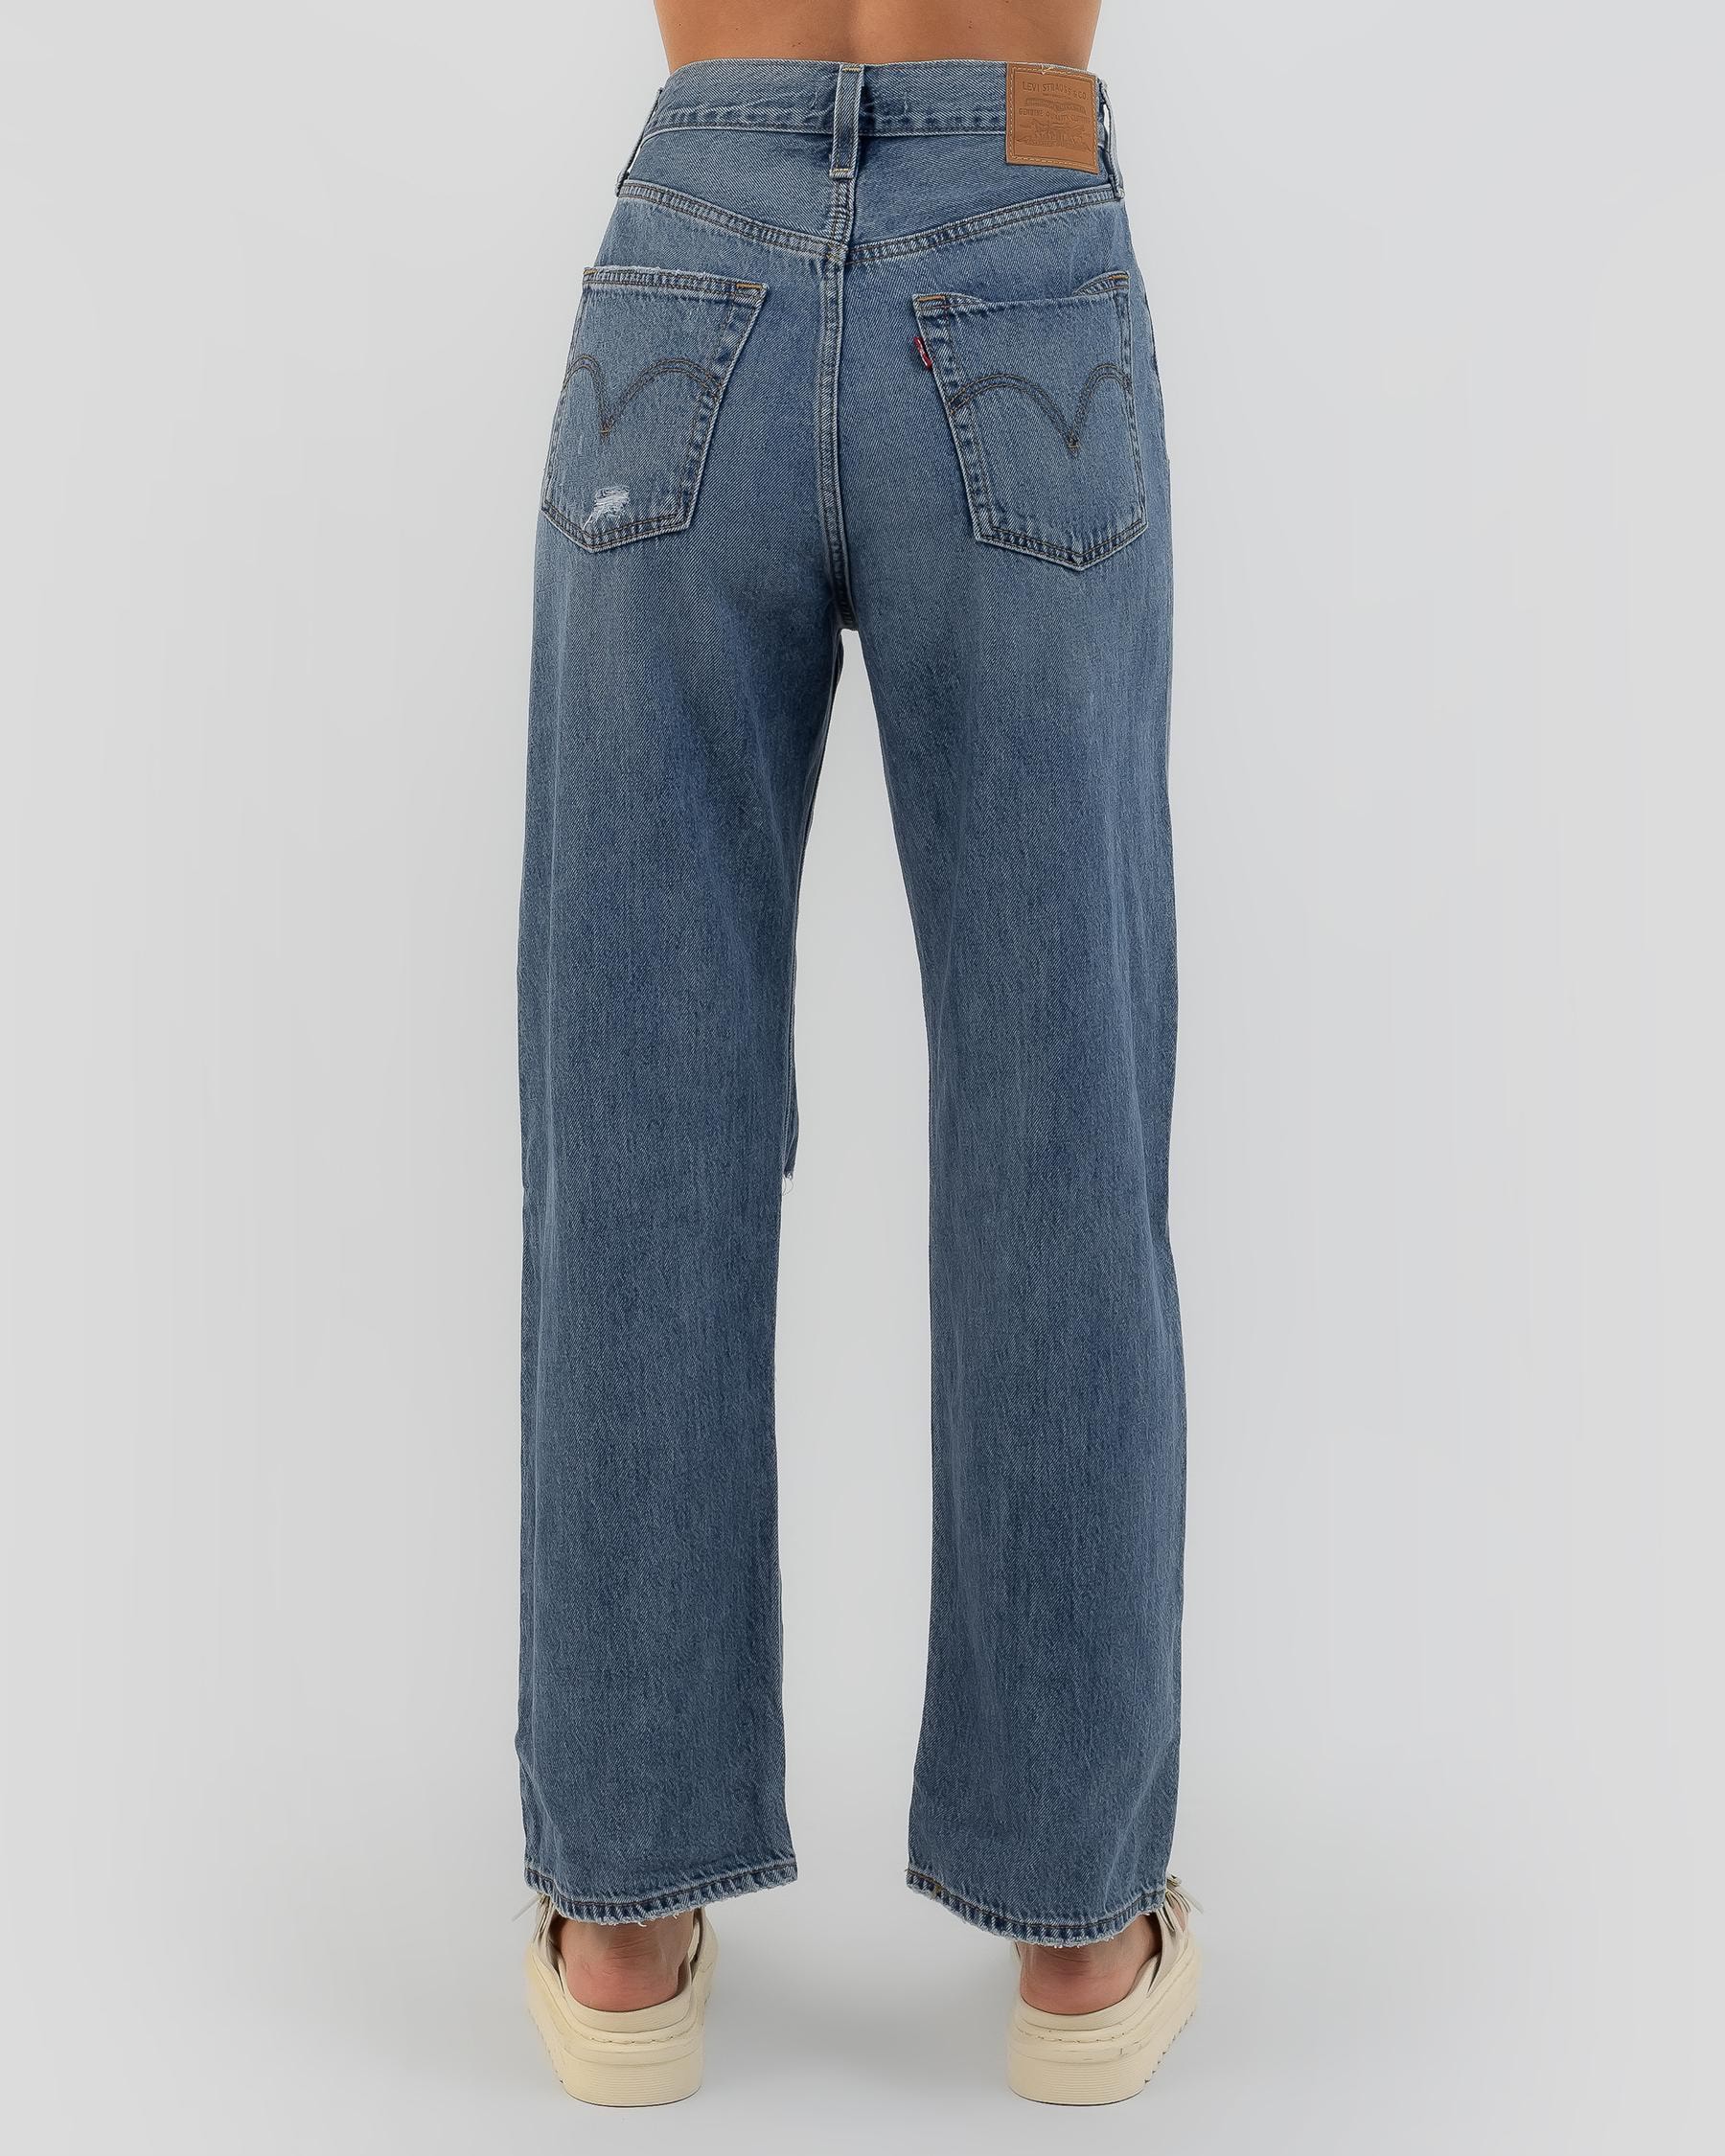 Levi's Ribcage Jeans In After Love - Fast Shipping & Easy Returns ...